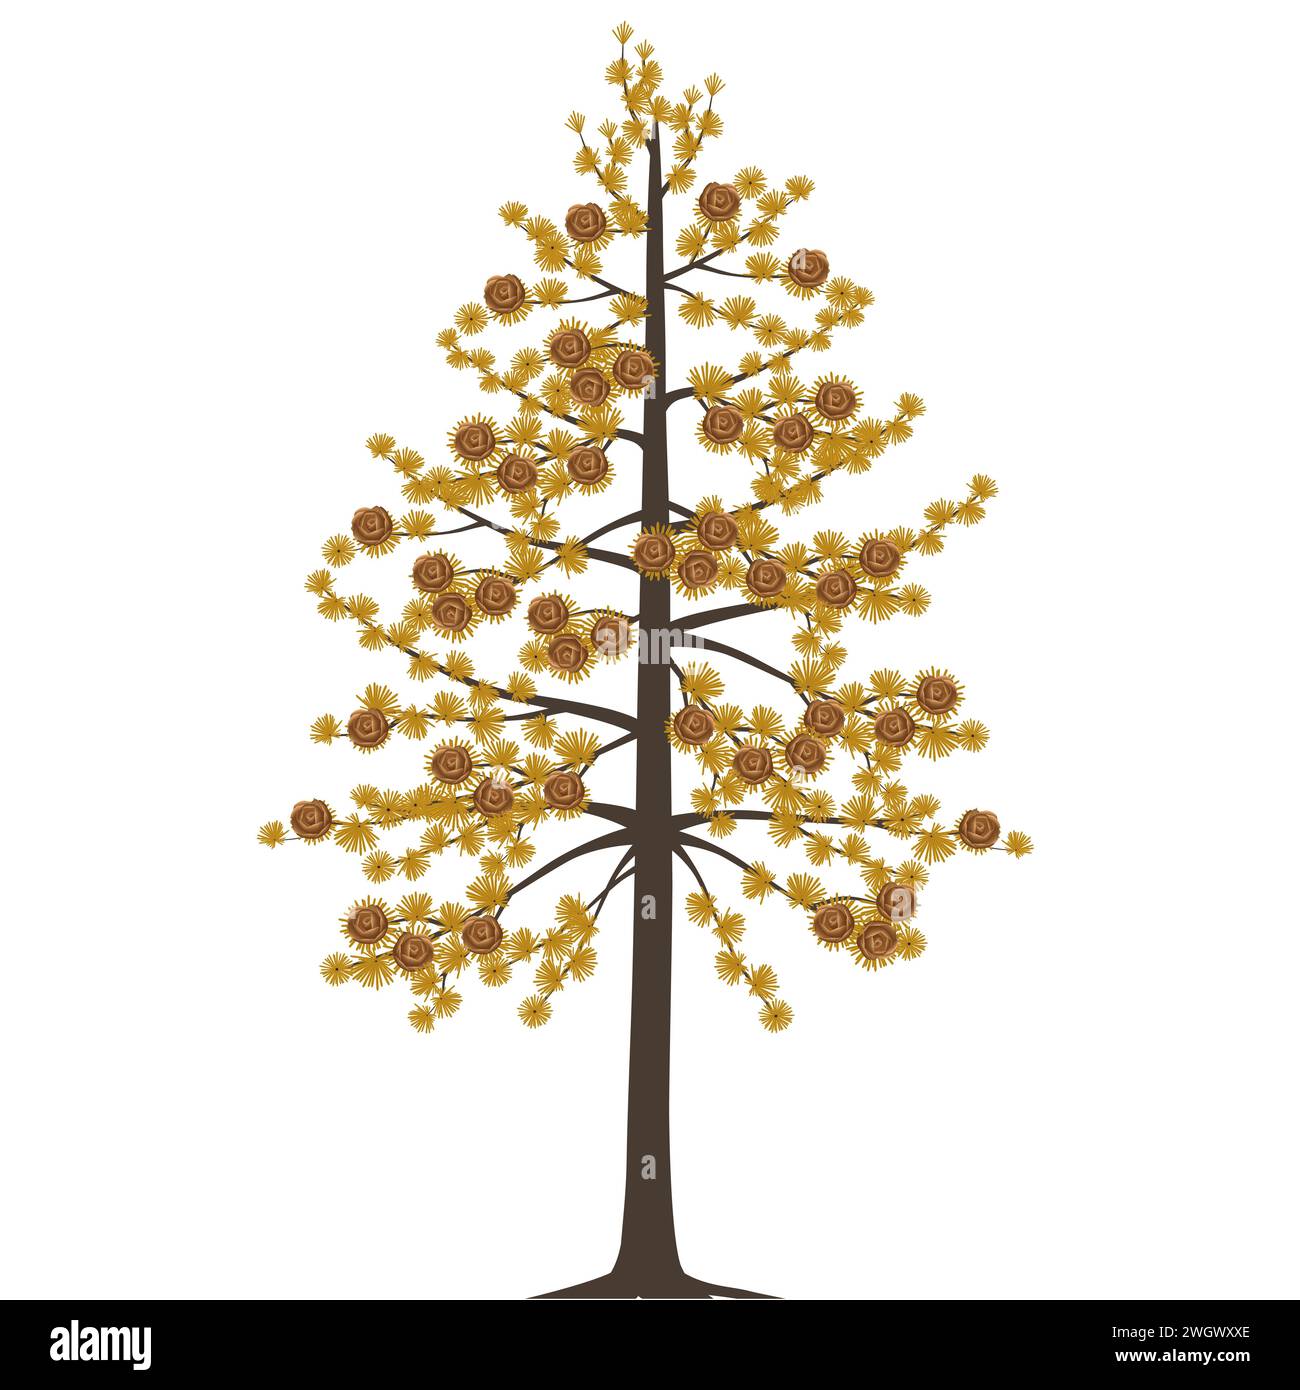 Dahurian gmelin larch tree in autumn on a white background. Stock Vector